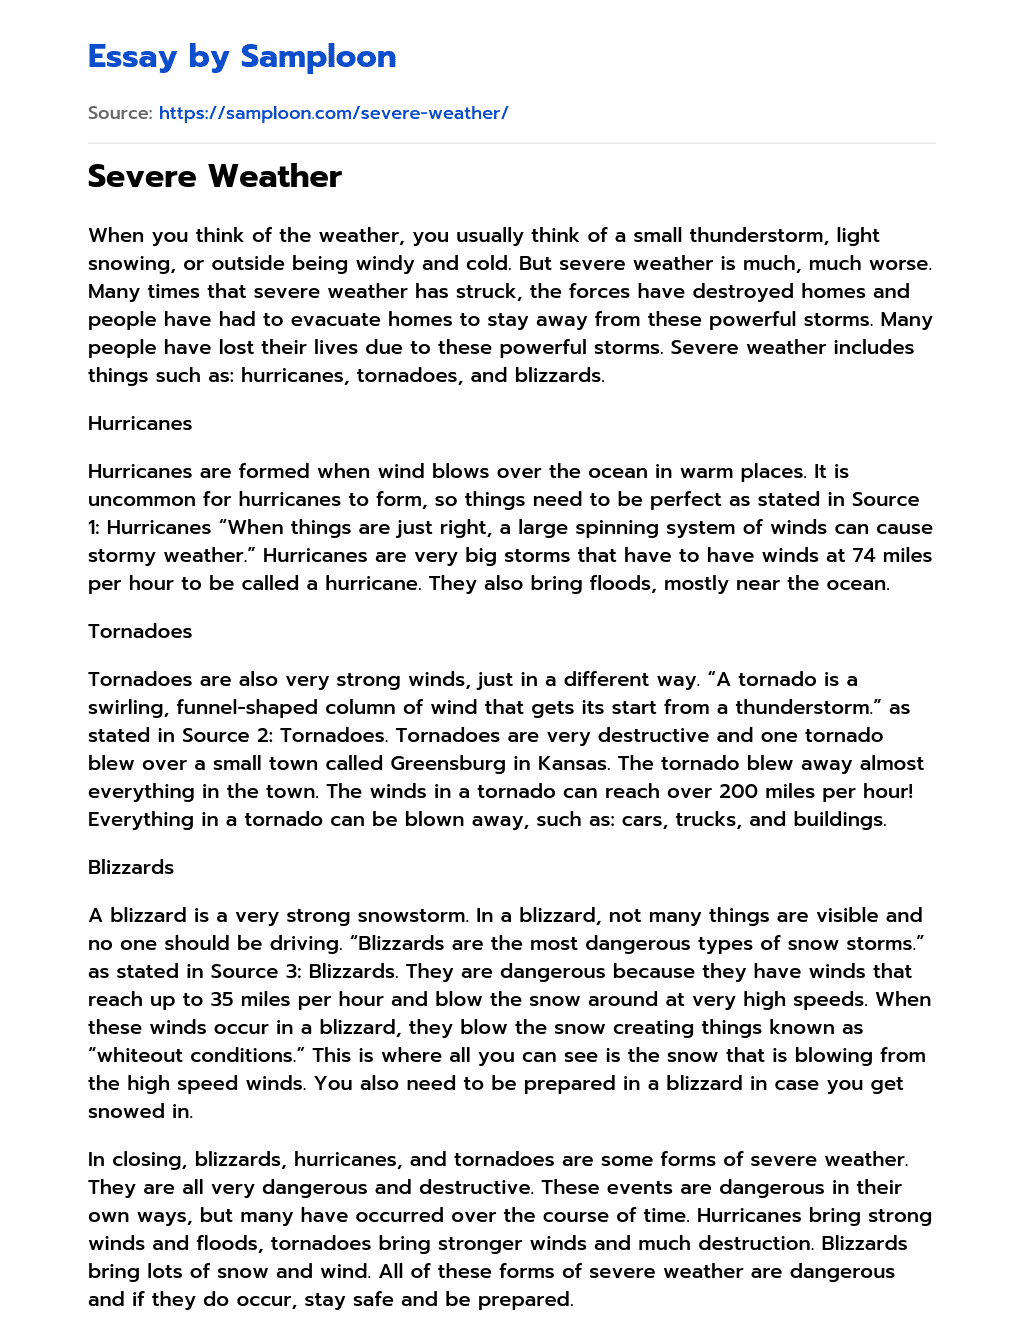 extreme weather events essay